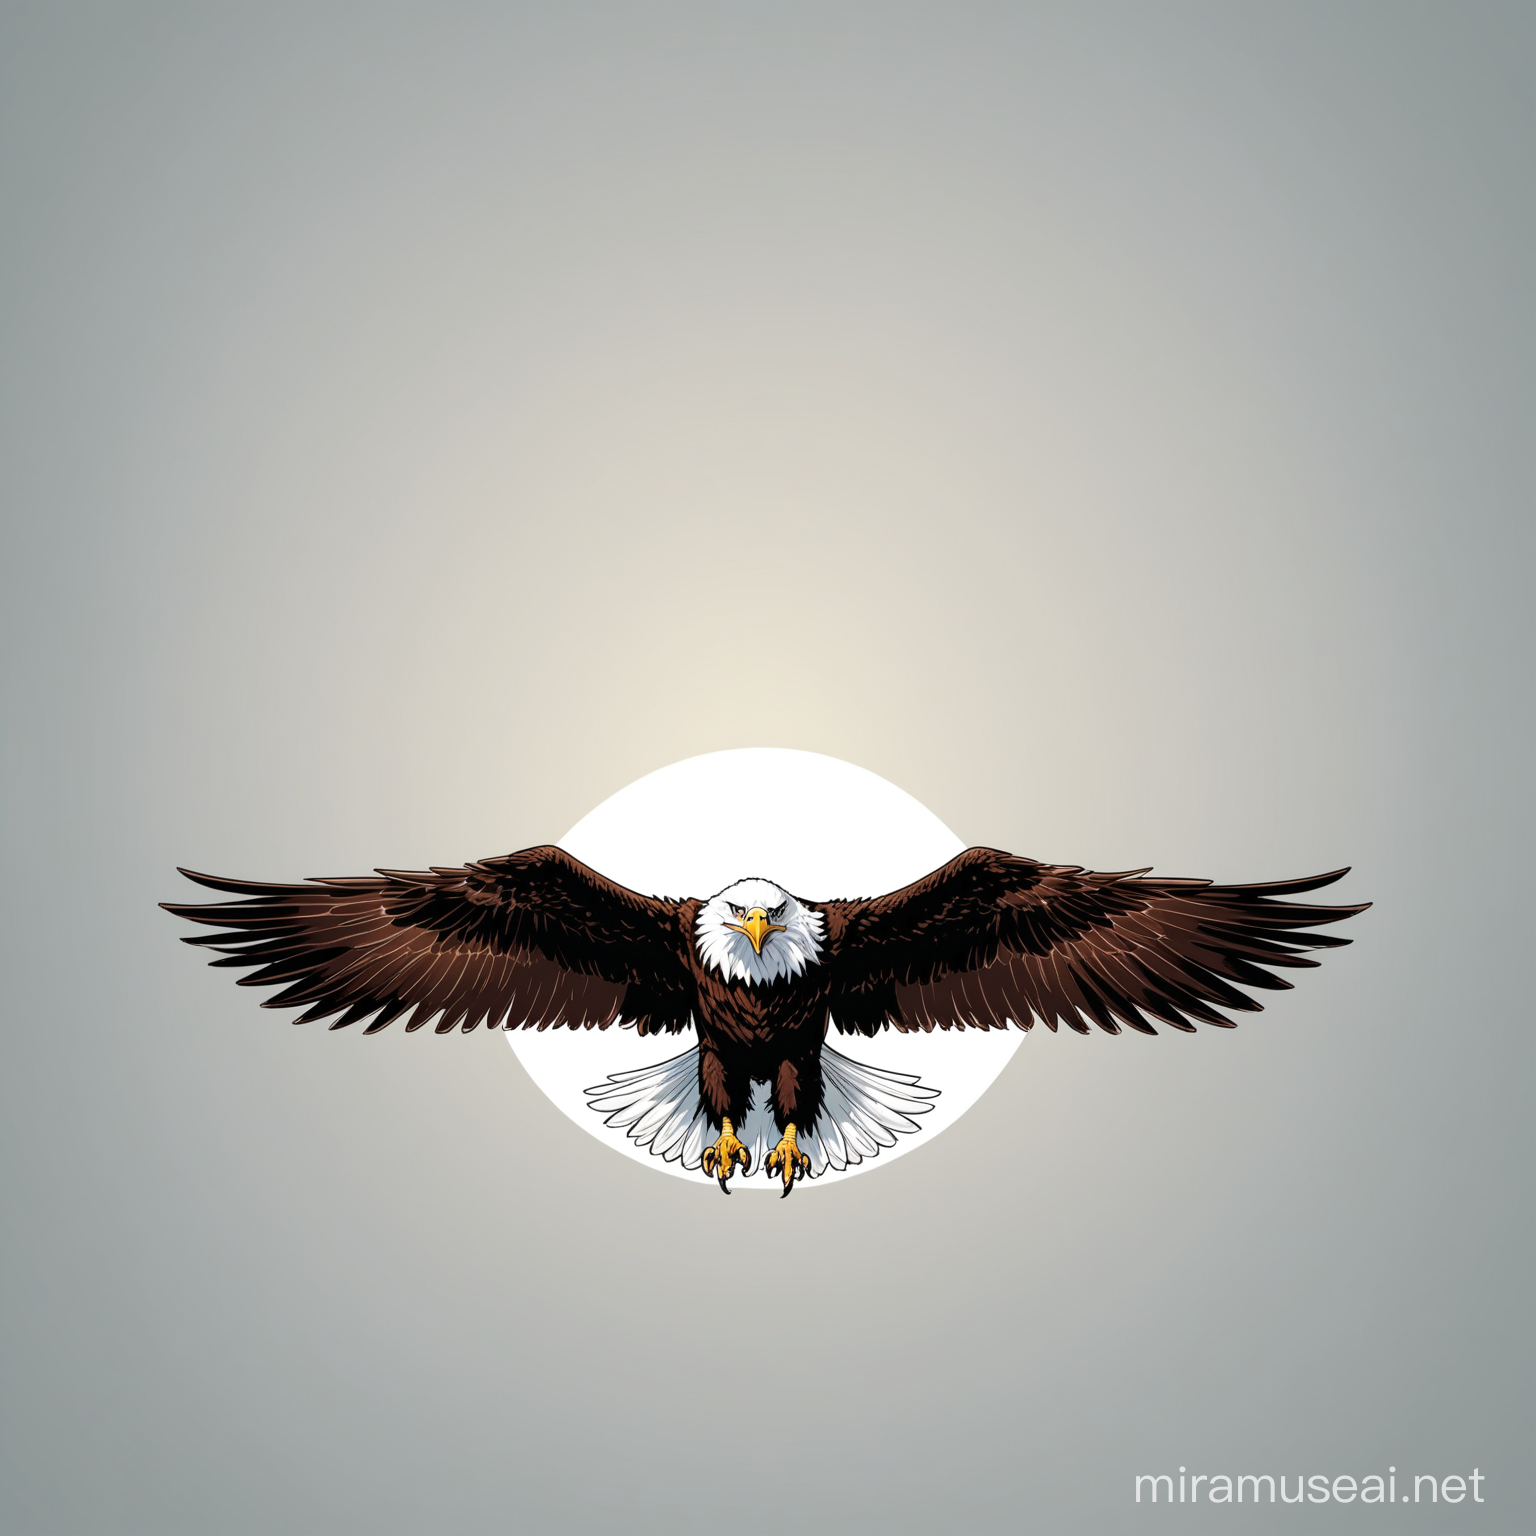 An eagle spreading its wings from left to right at 180 degree facing towards screen